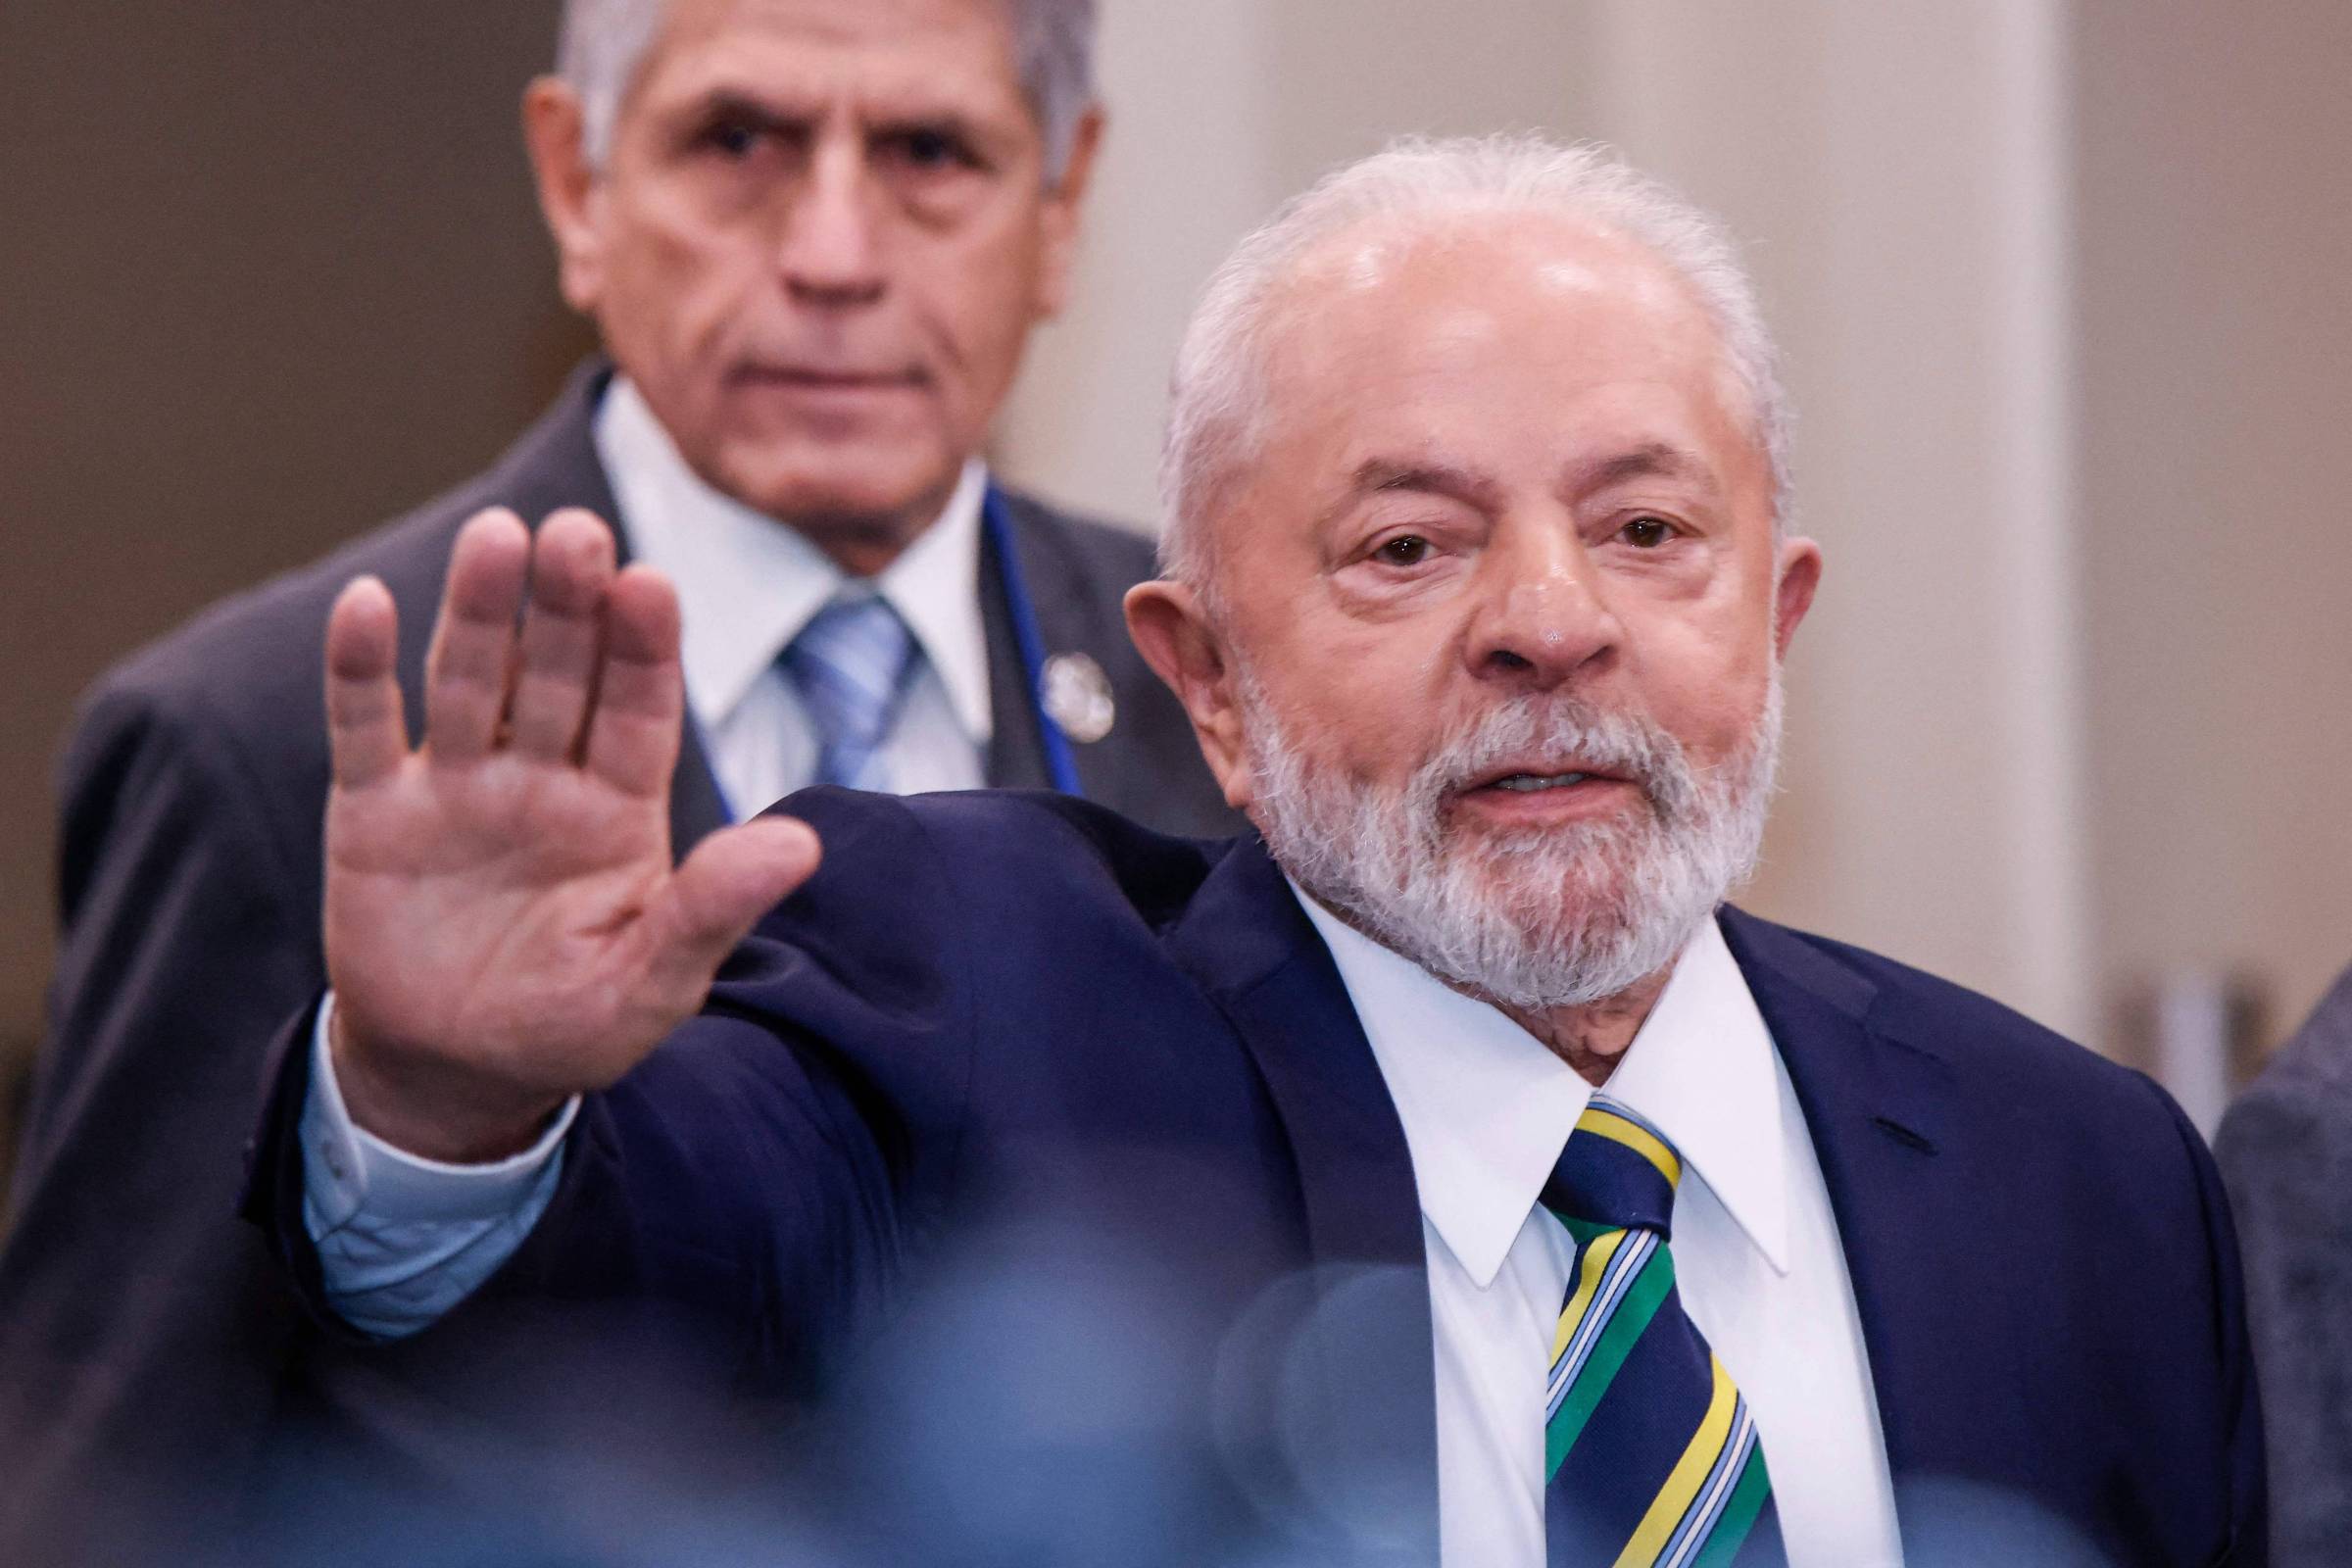 Meeting with Zelenski will be about the problems he wants to talk to me about, says Lula